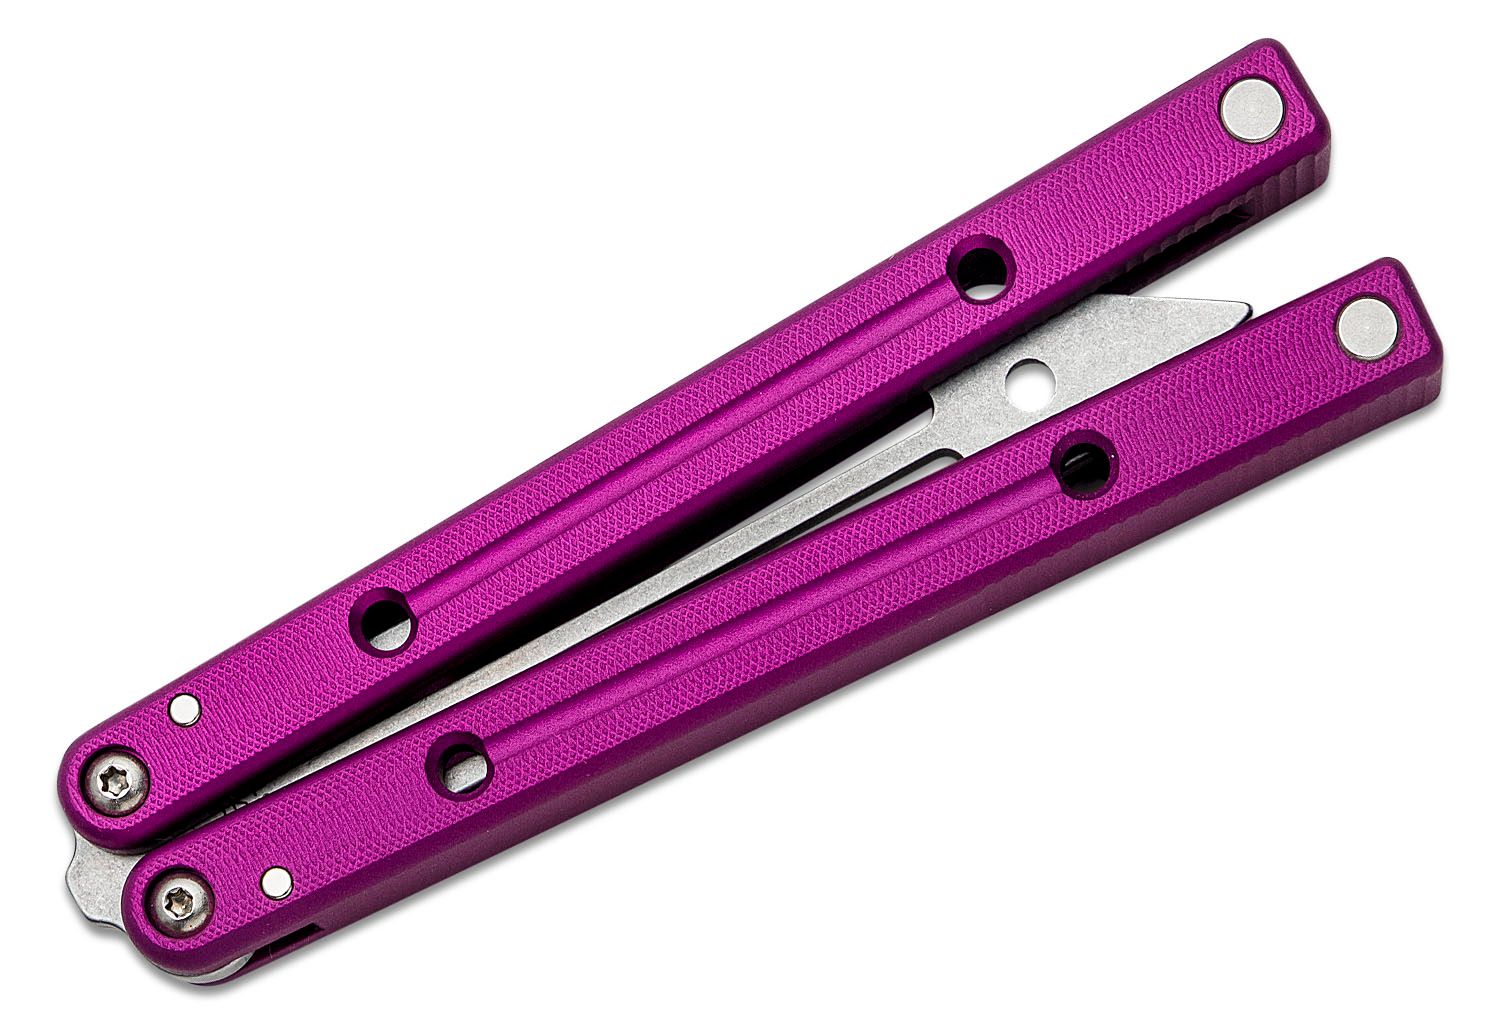 Squid Industries Squidtrainer V4 Balisong Butterfly Trainer 5.2 